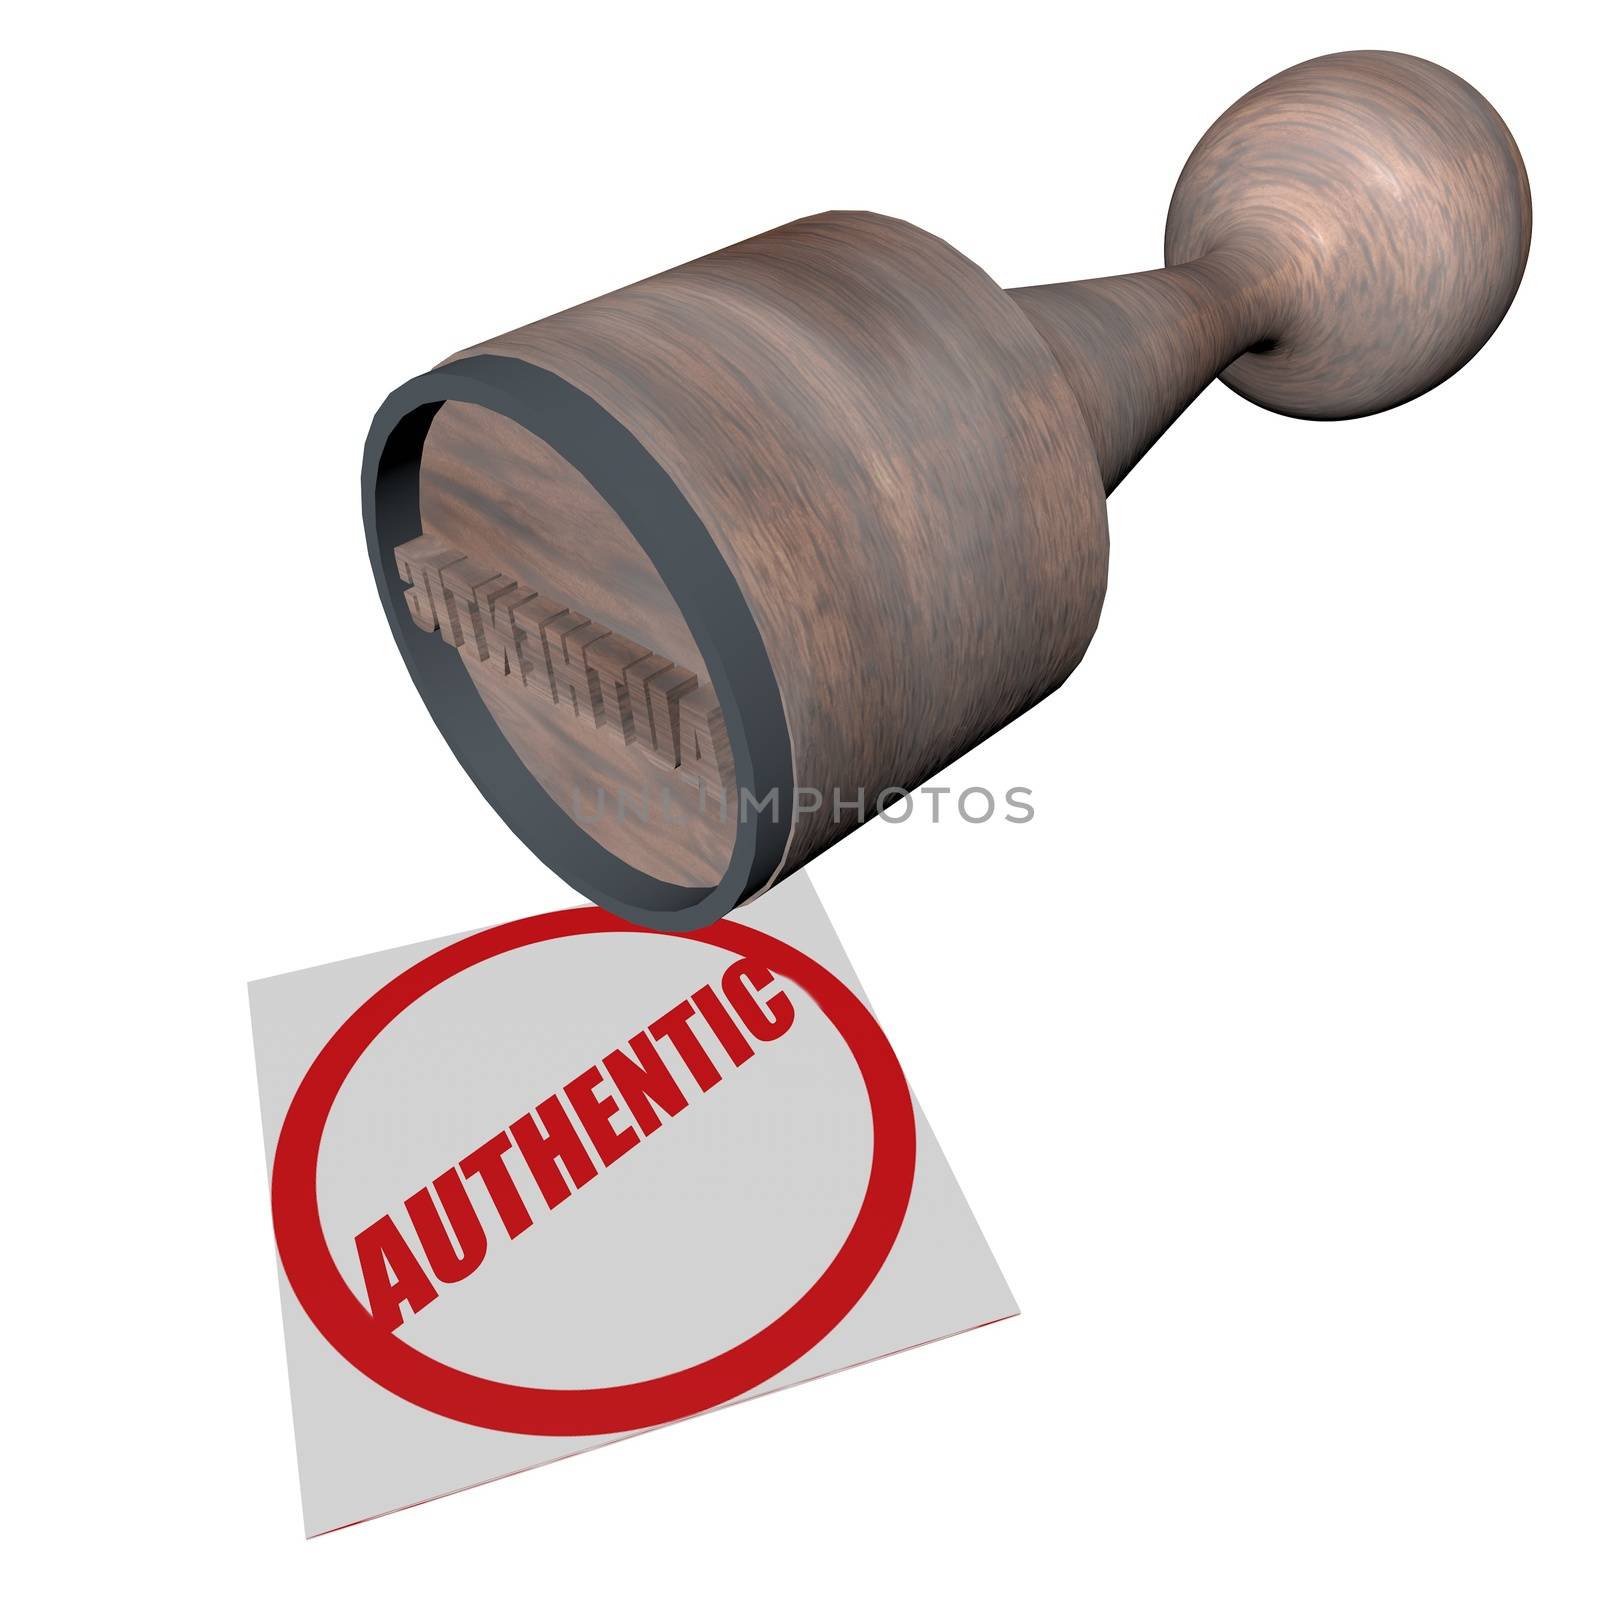 Wooden stamp stamping word "Authentic", 3d render